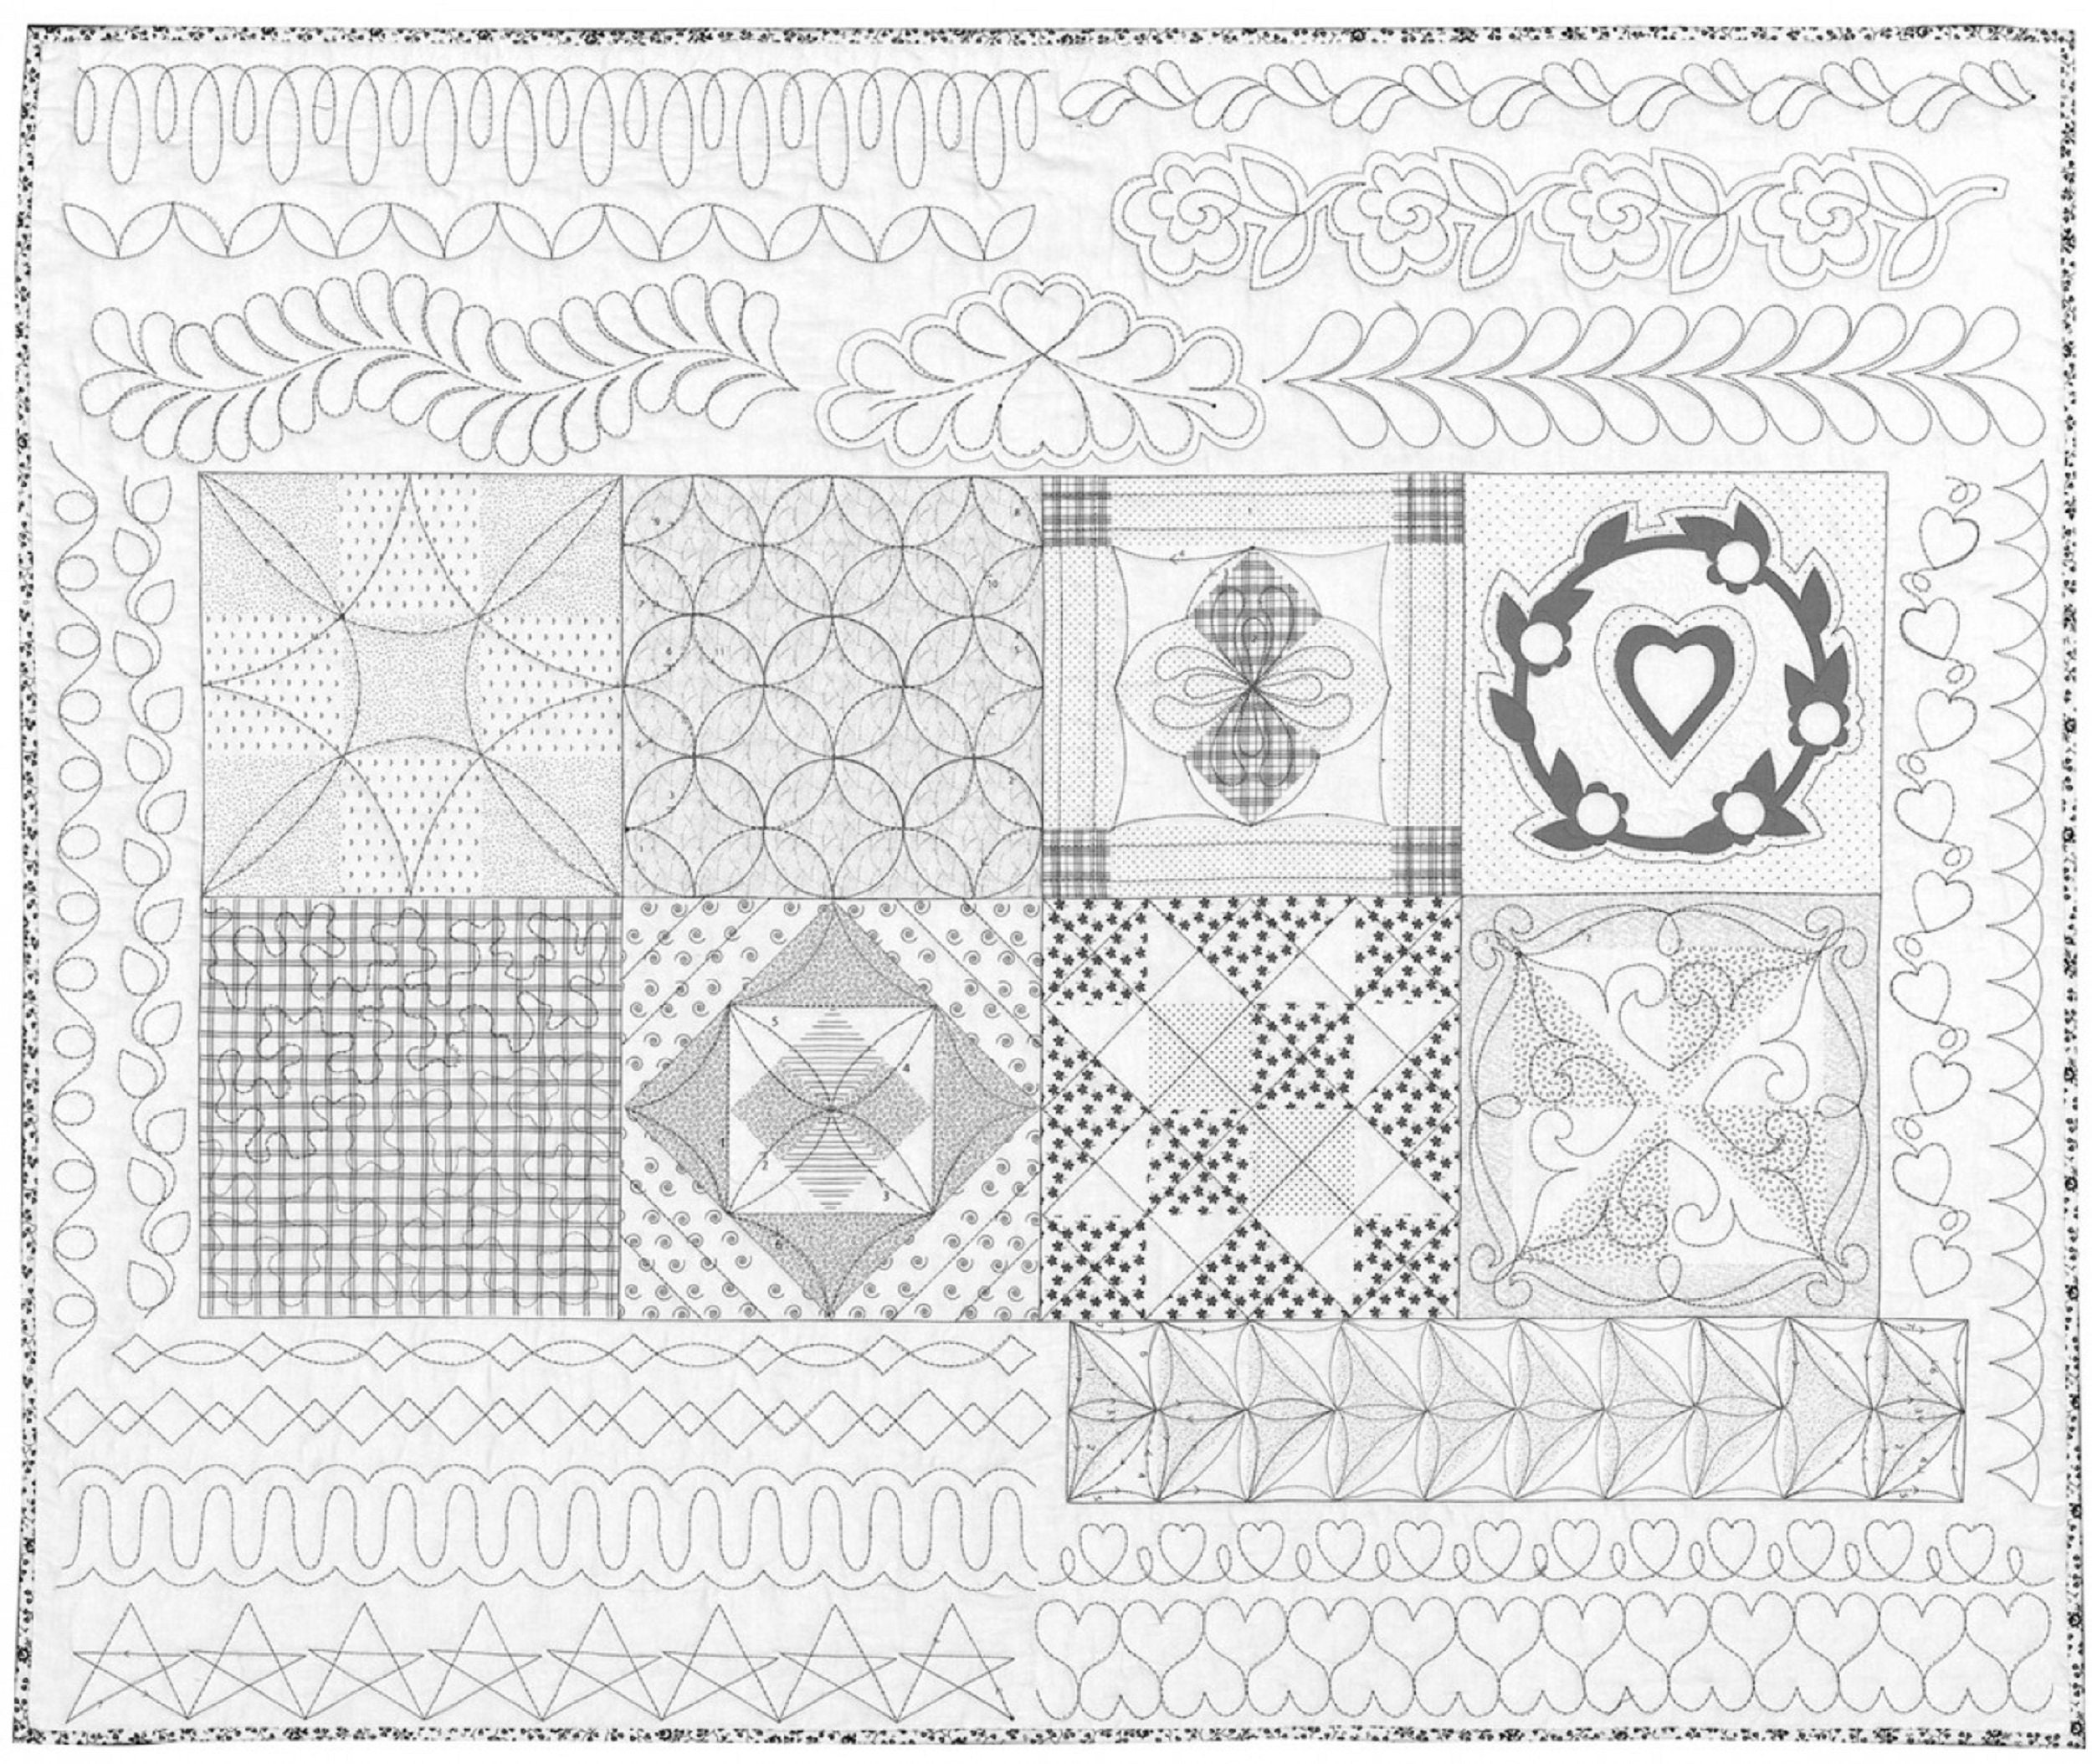 Learn Free Motion Machine Quilting Pattern Pack Download Beginners